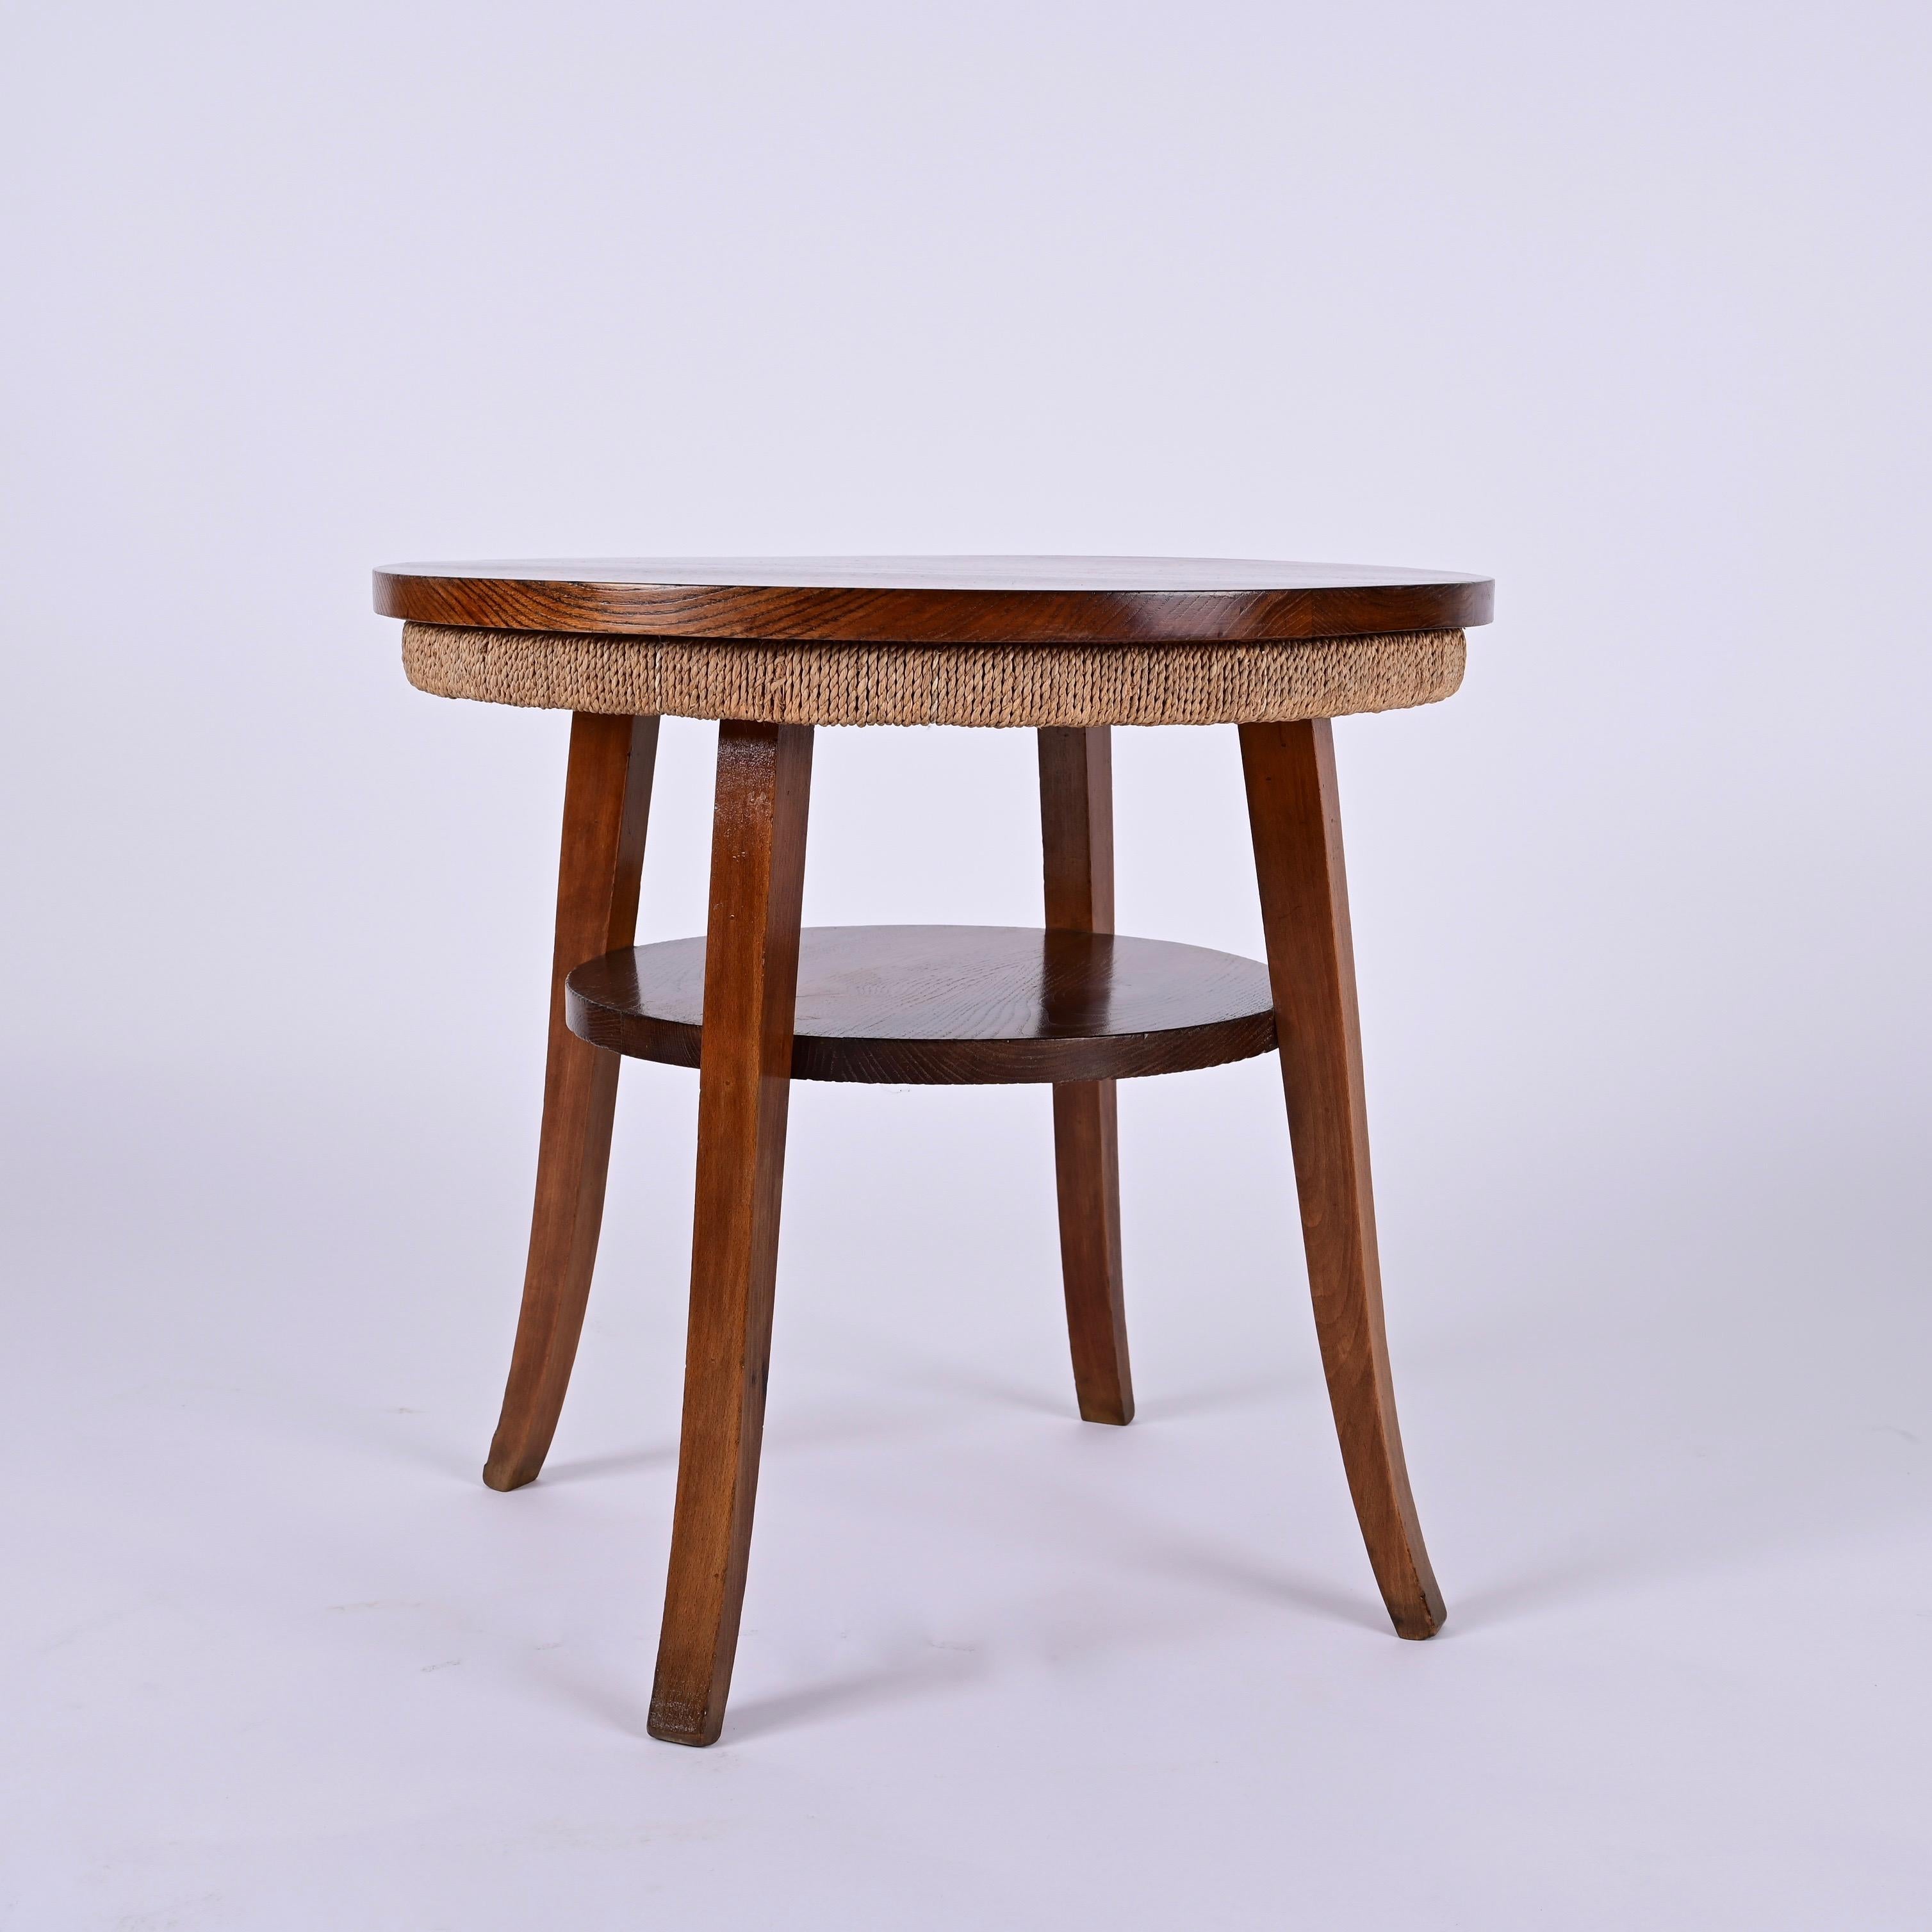 20th Century Midcentury Two-Tier Round Rope and Chestnut Wood Italian Coffee Table, 1950s For Sale